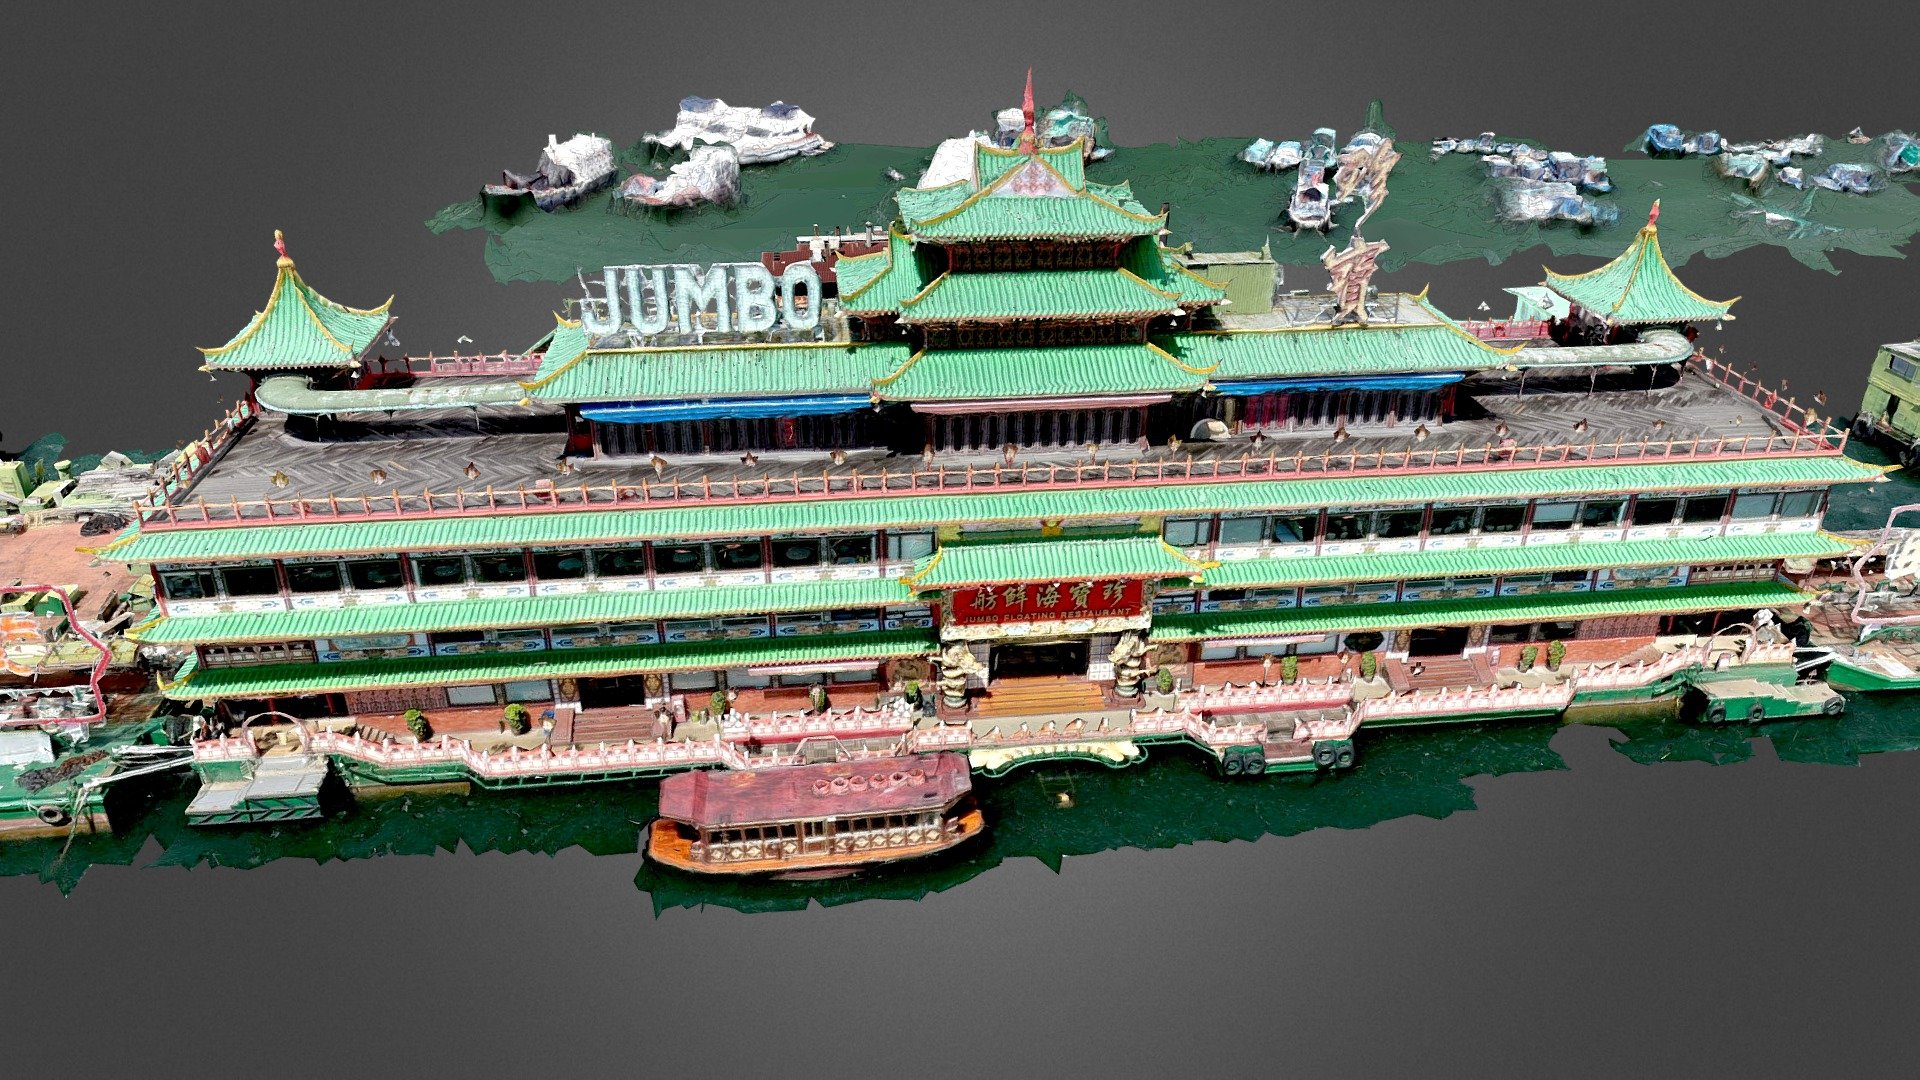 Jumbo Kingdom consists of the Jumbo Floating Restaurant and the adjacent Tai Pak Floating Restaurant, are renowned tourist attractions in Aberdeen South Typhoon Shelter, within Hong Kong's Aberdeen Harbour. It had been closed down since November 2020.

Some introduction links for Jumbi Kingdom:

https://www.bbc.com/news/world-asia-china-61875061

https://channelchk.com/%E5%8D%B3%E6%99%82%E7%86%B1%E8%A9%B1/%E5%89%8D%E6%97%A5%E5%85%AC%E4%BD%88%E6%9C%83%E7%A7%BB%E9%9B%A2%E9%A6%99%E6%B8%AF-%E7%8F%8D%E5%AF%B6%E6%B5%B7%E9%AE%AE%E8%88%AB%E5%BB%9A%E6%88%BF%E8%88%B9%E5%85%A5%E6%B0%B4%E5%82%BE%E5%81%B4

https://www.storm.mg/lifestyle/2354341?page=1

https://zh.m.wikipedia.org/zh-hk/%E9%BB%AF%E7%84%B6%E9%8A%B7%E9%AD%82%E9%A3%AF - [Fallen] Jumbo Kingdom, The Chinese Restaurant - Buy Royalty Free 3D model by Peter93 3d model